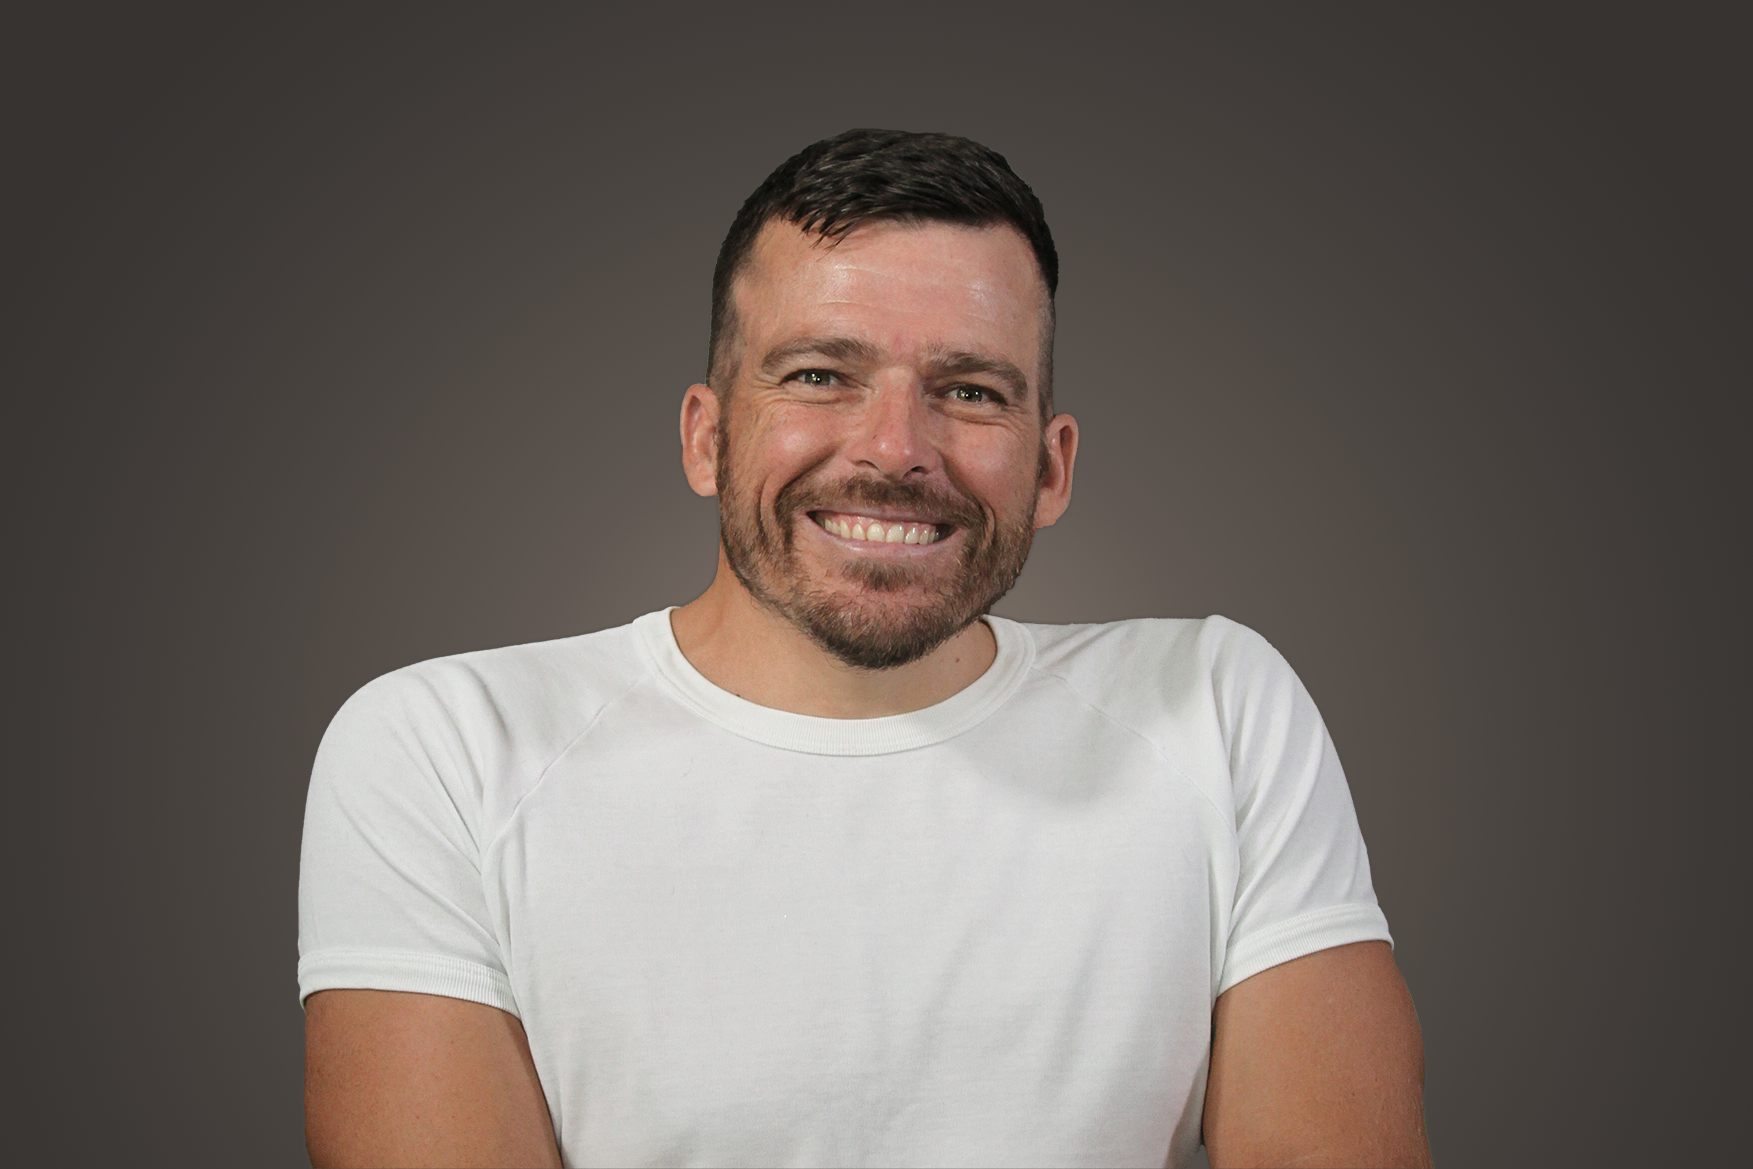 Kurt Fearnley is wearing a white tshirt and smiling into the camera. He has facial hair and has a dark background.